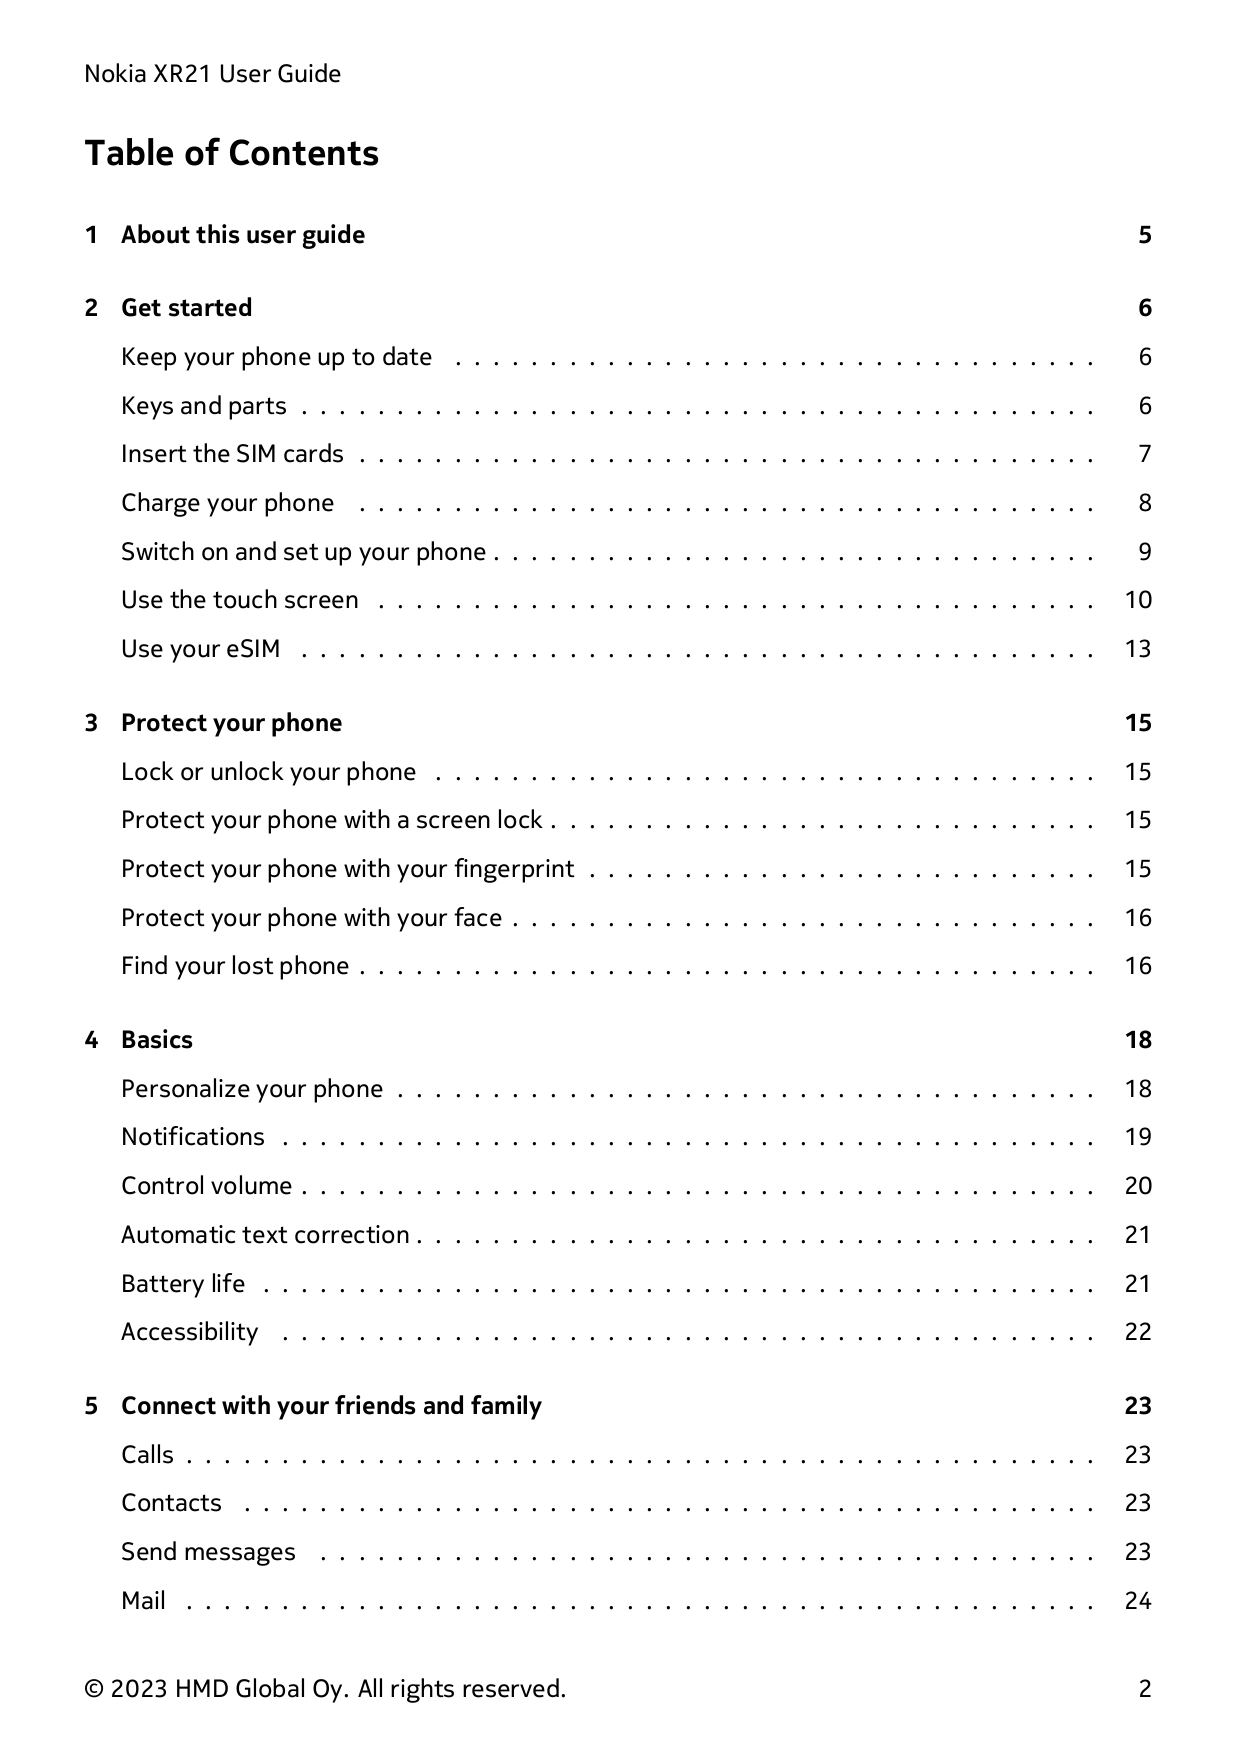 Nokia XR21 User GuideTable of Contents1 About this user guide52 Get started6Keep your phone up to date . . . . . . . . . . . . .